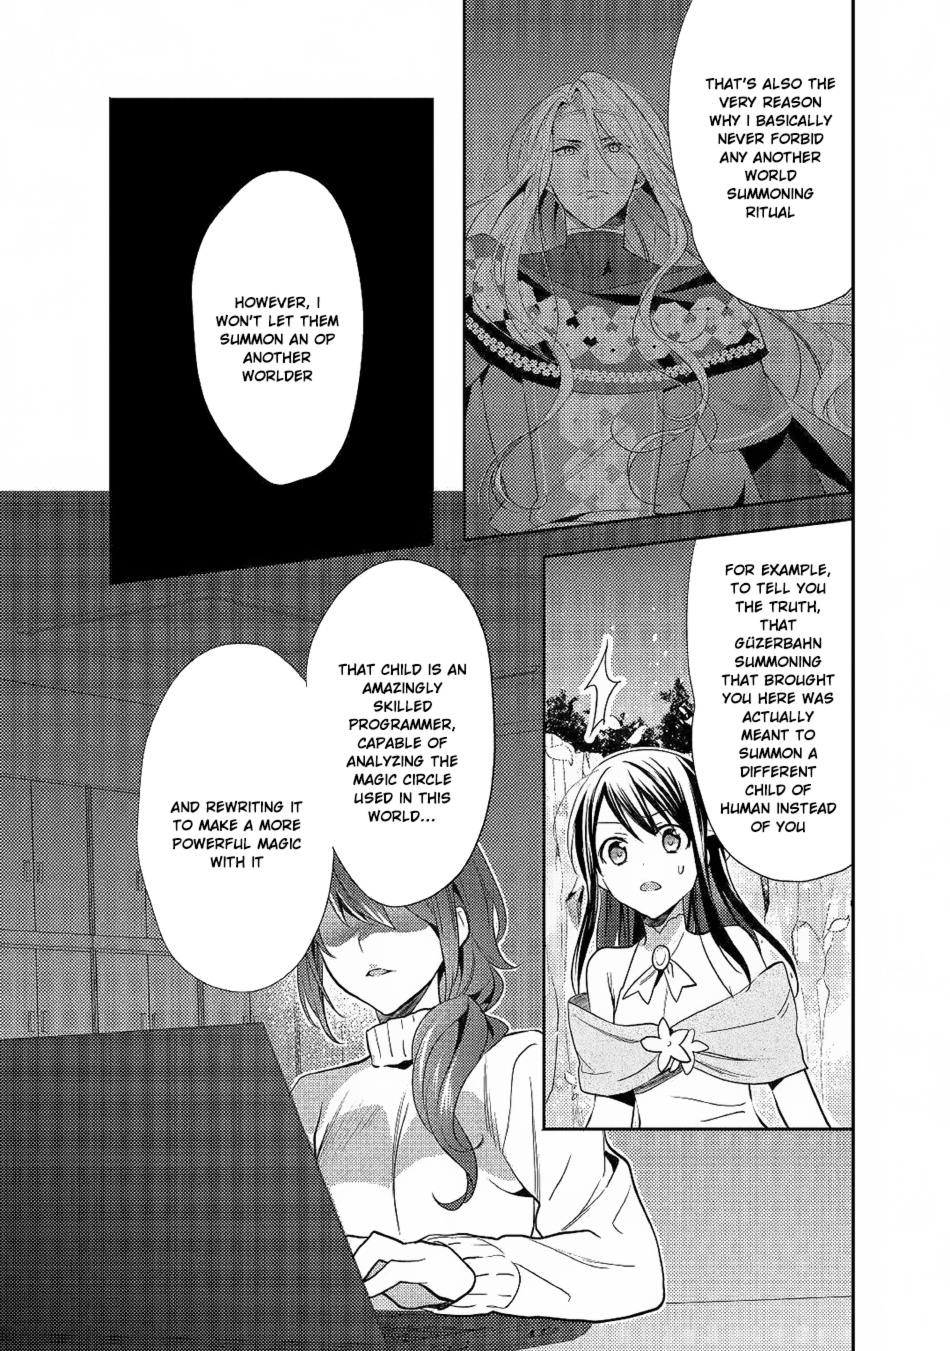 In Another World, I'm Called: the Black Healer Vol. 5 Ch. 33